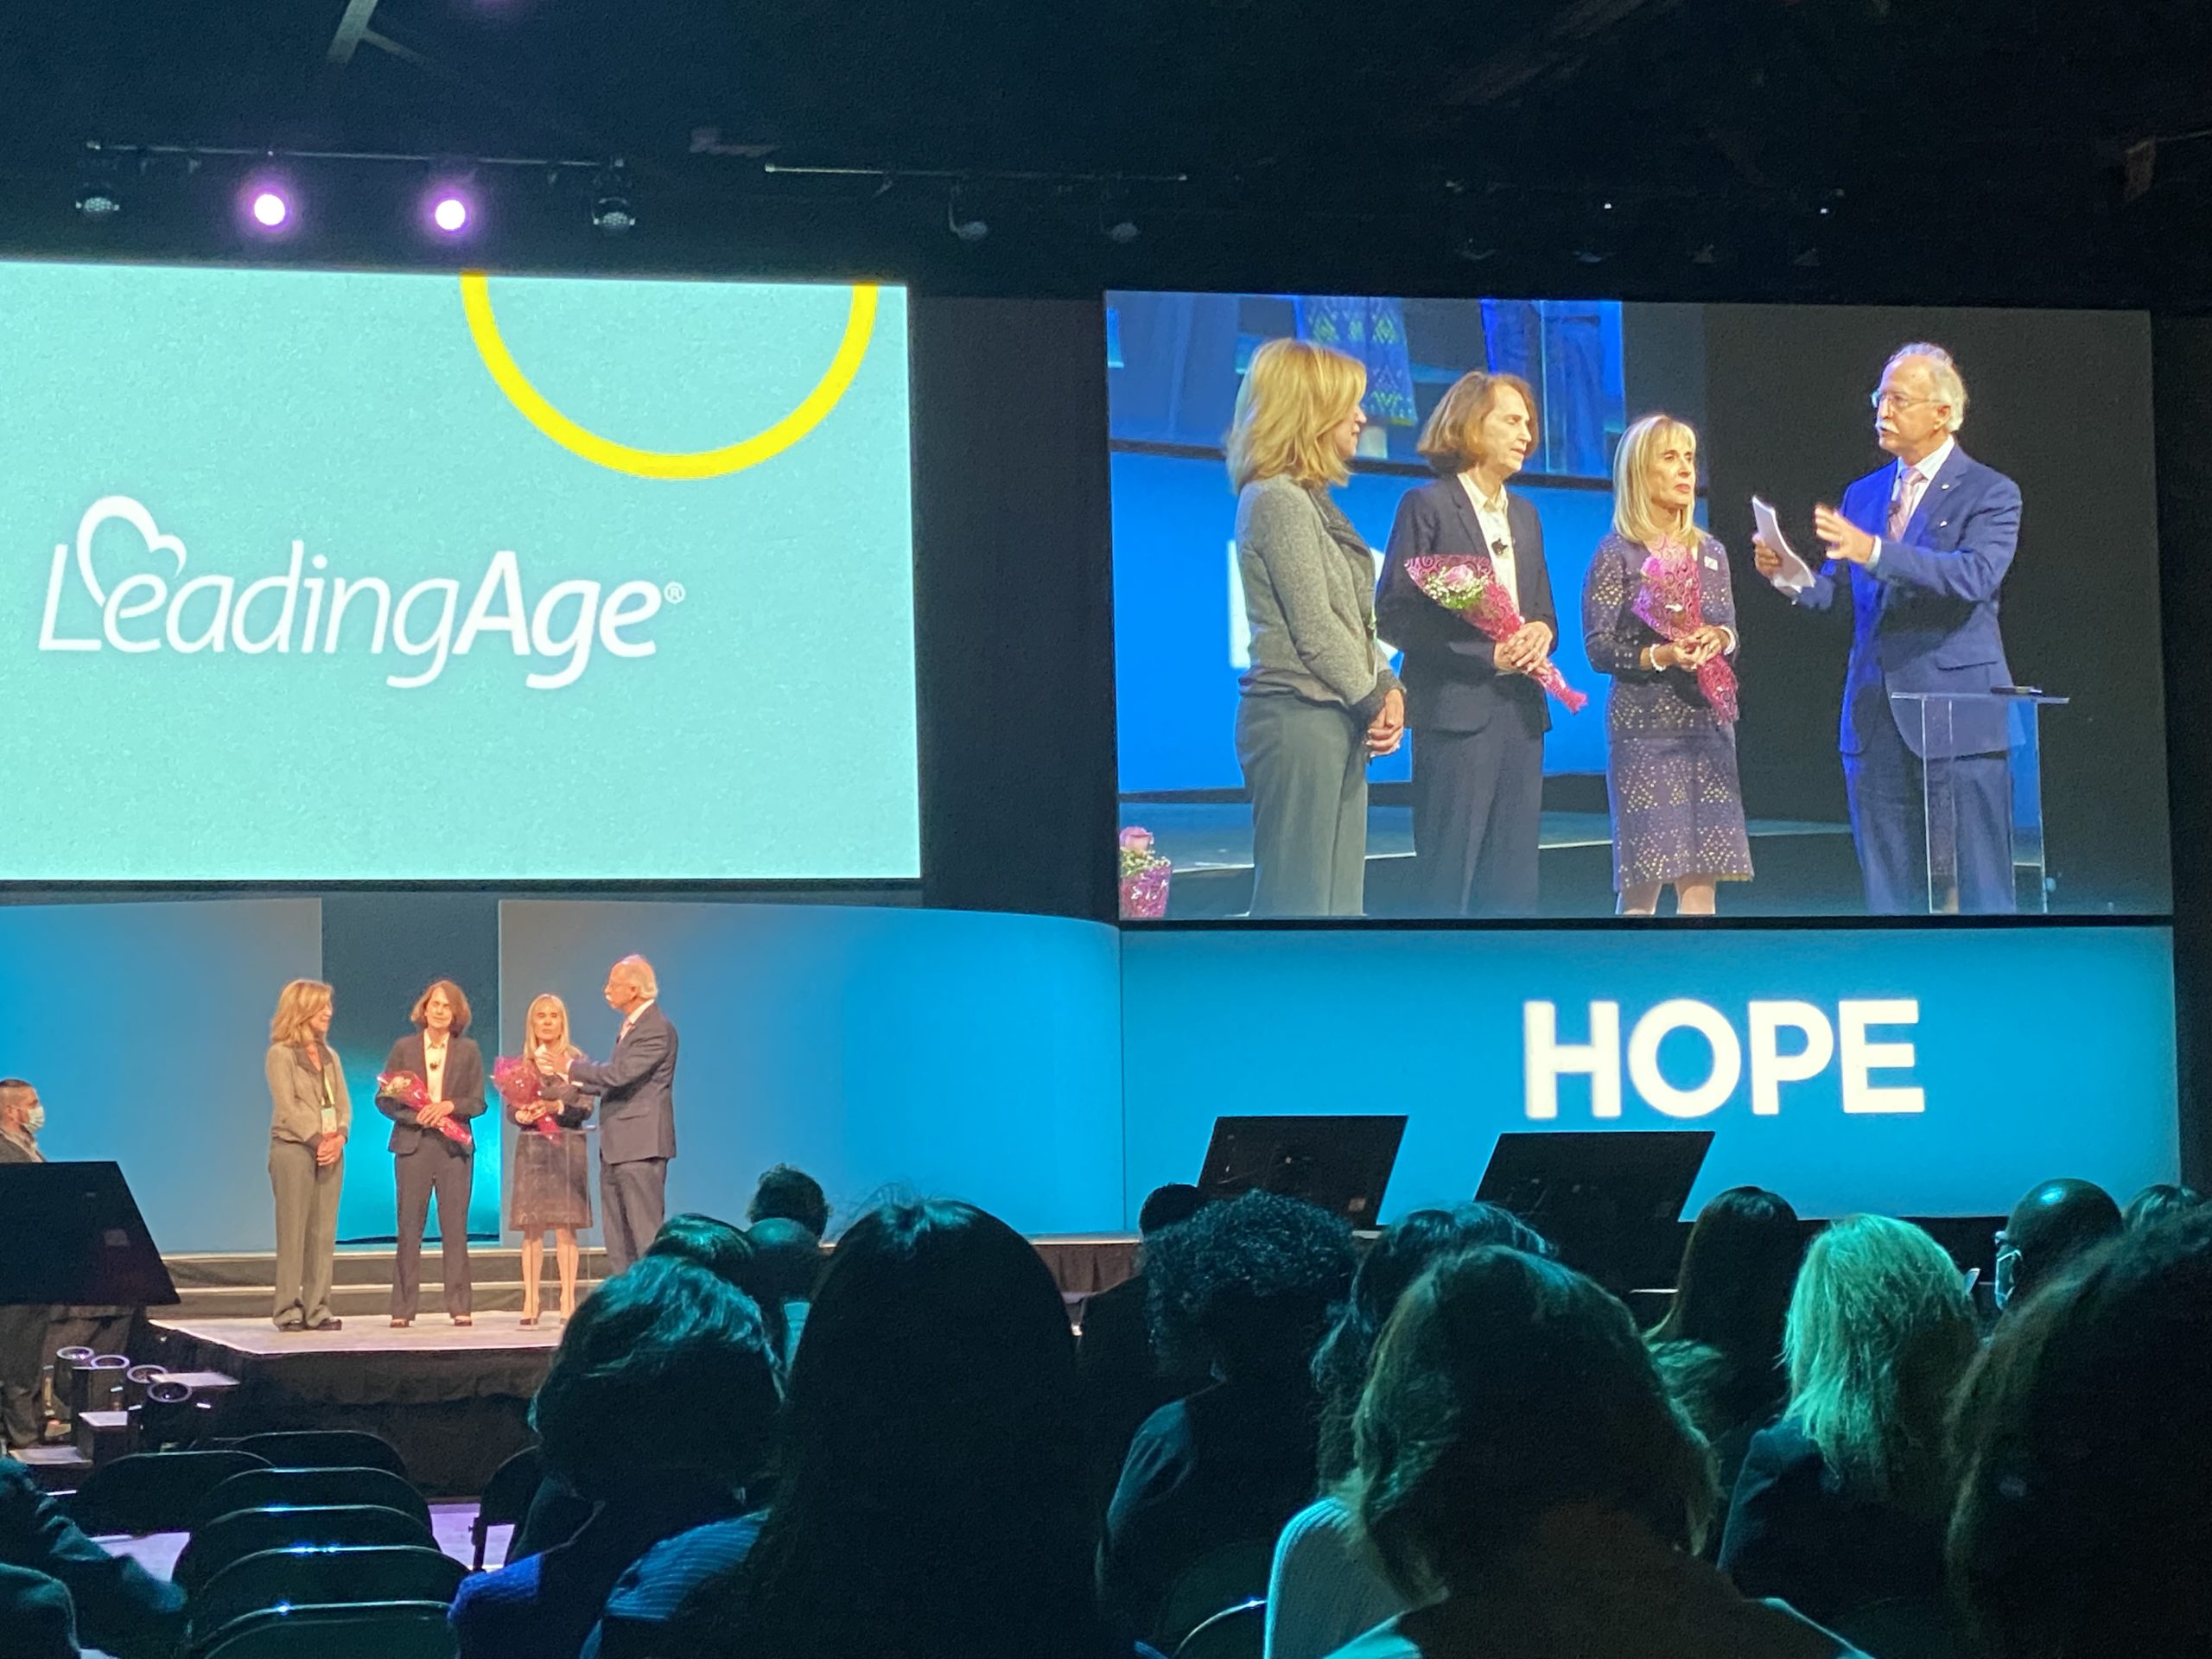 What We Learned from the LeadingAge Conference 2021